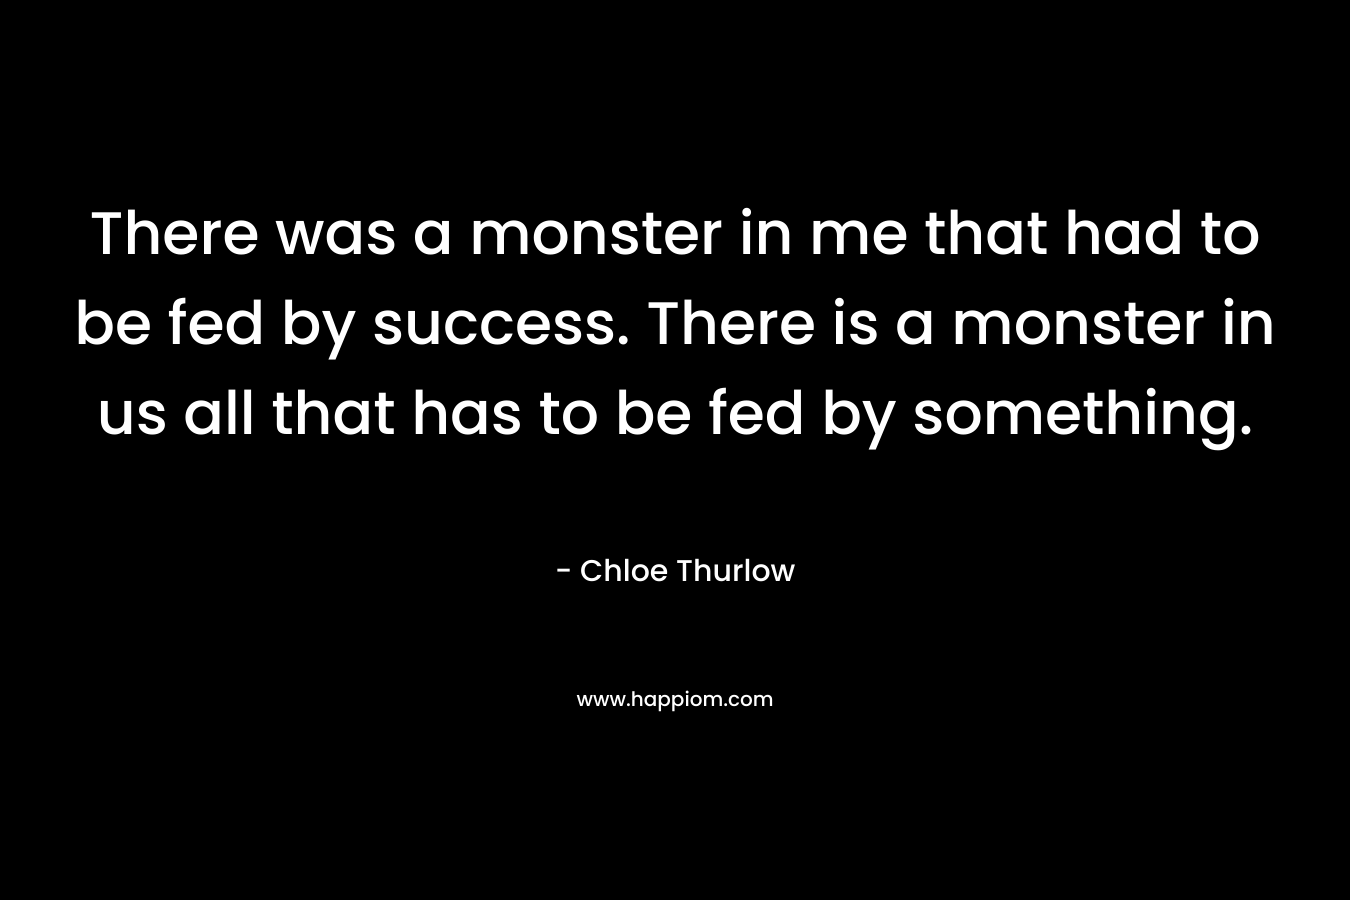 There was a monster in me that had to be fed by success. There is a monster in us all that has to be fed by something.